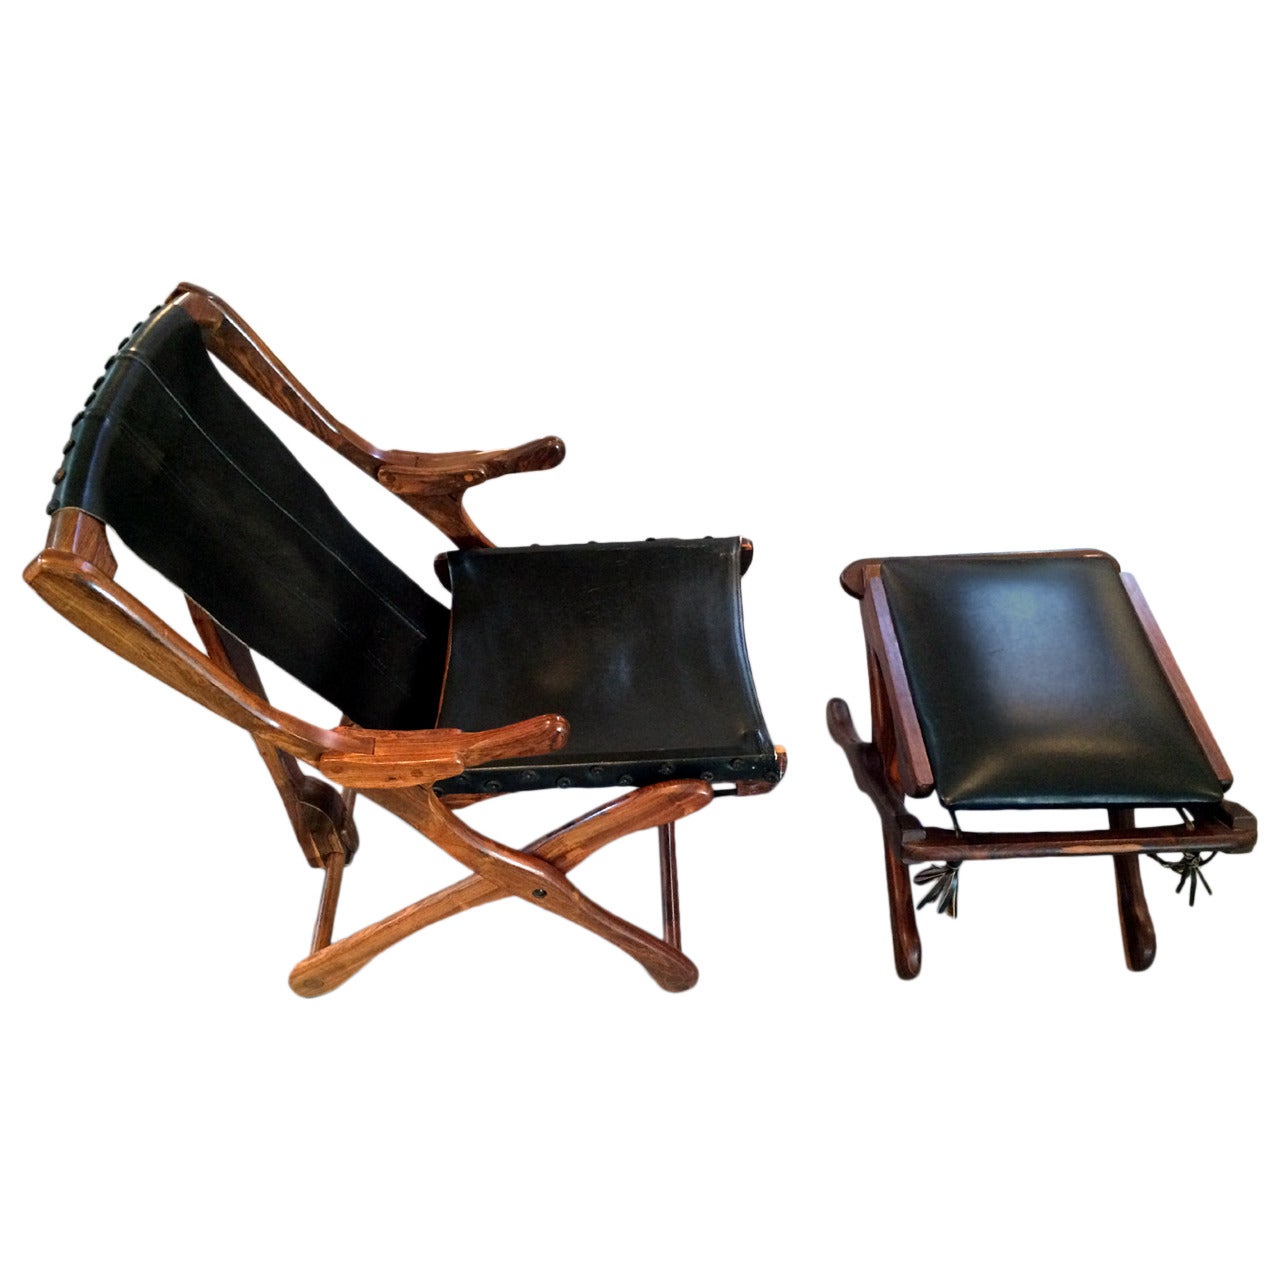 Rosewood and Leather Lounge Chair with Ottoman Don Shoemaker